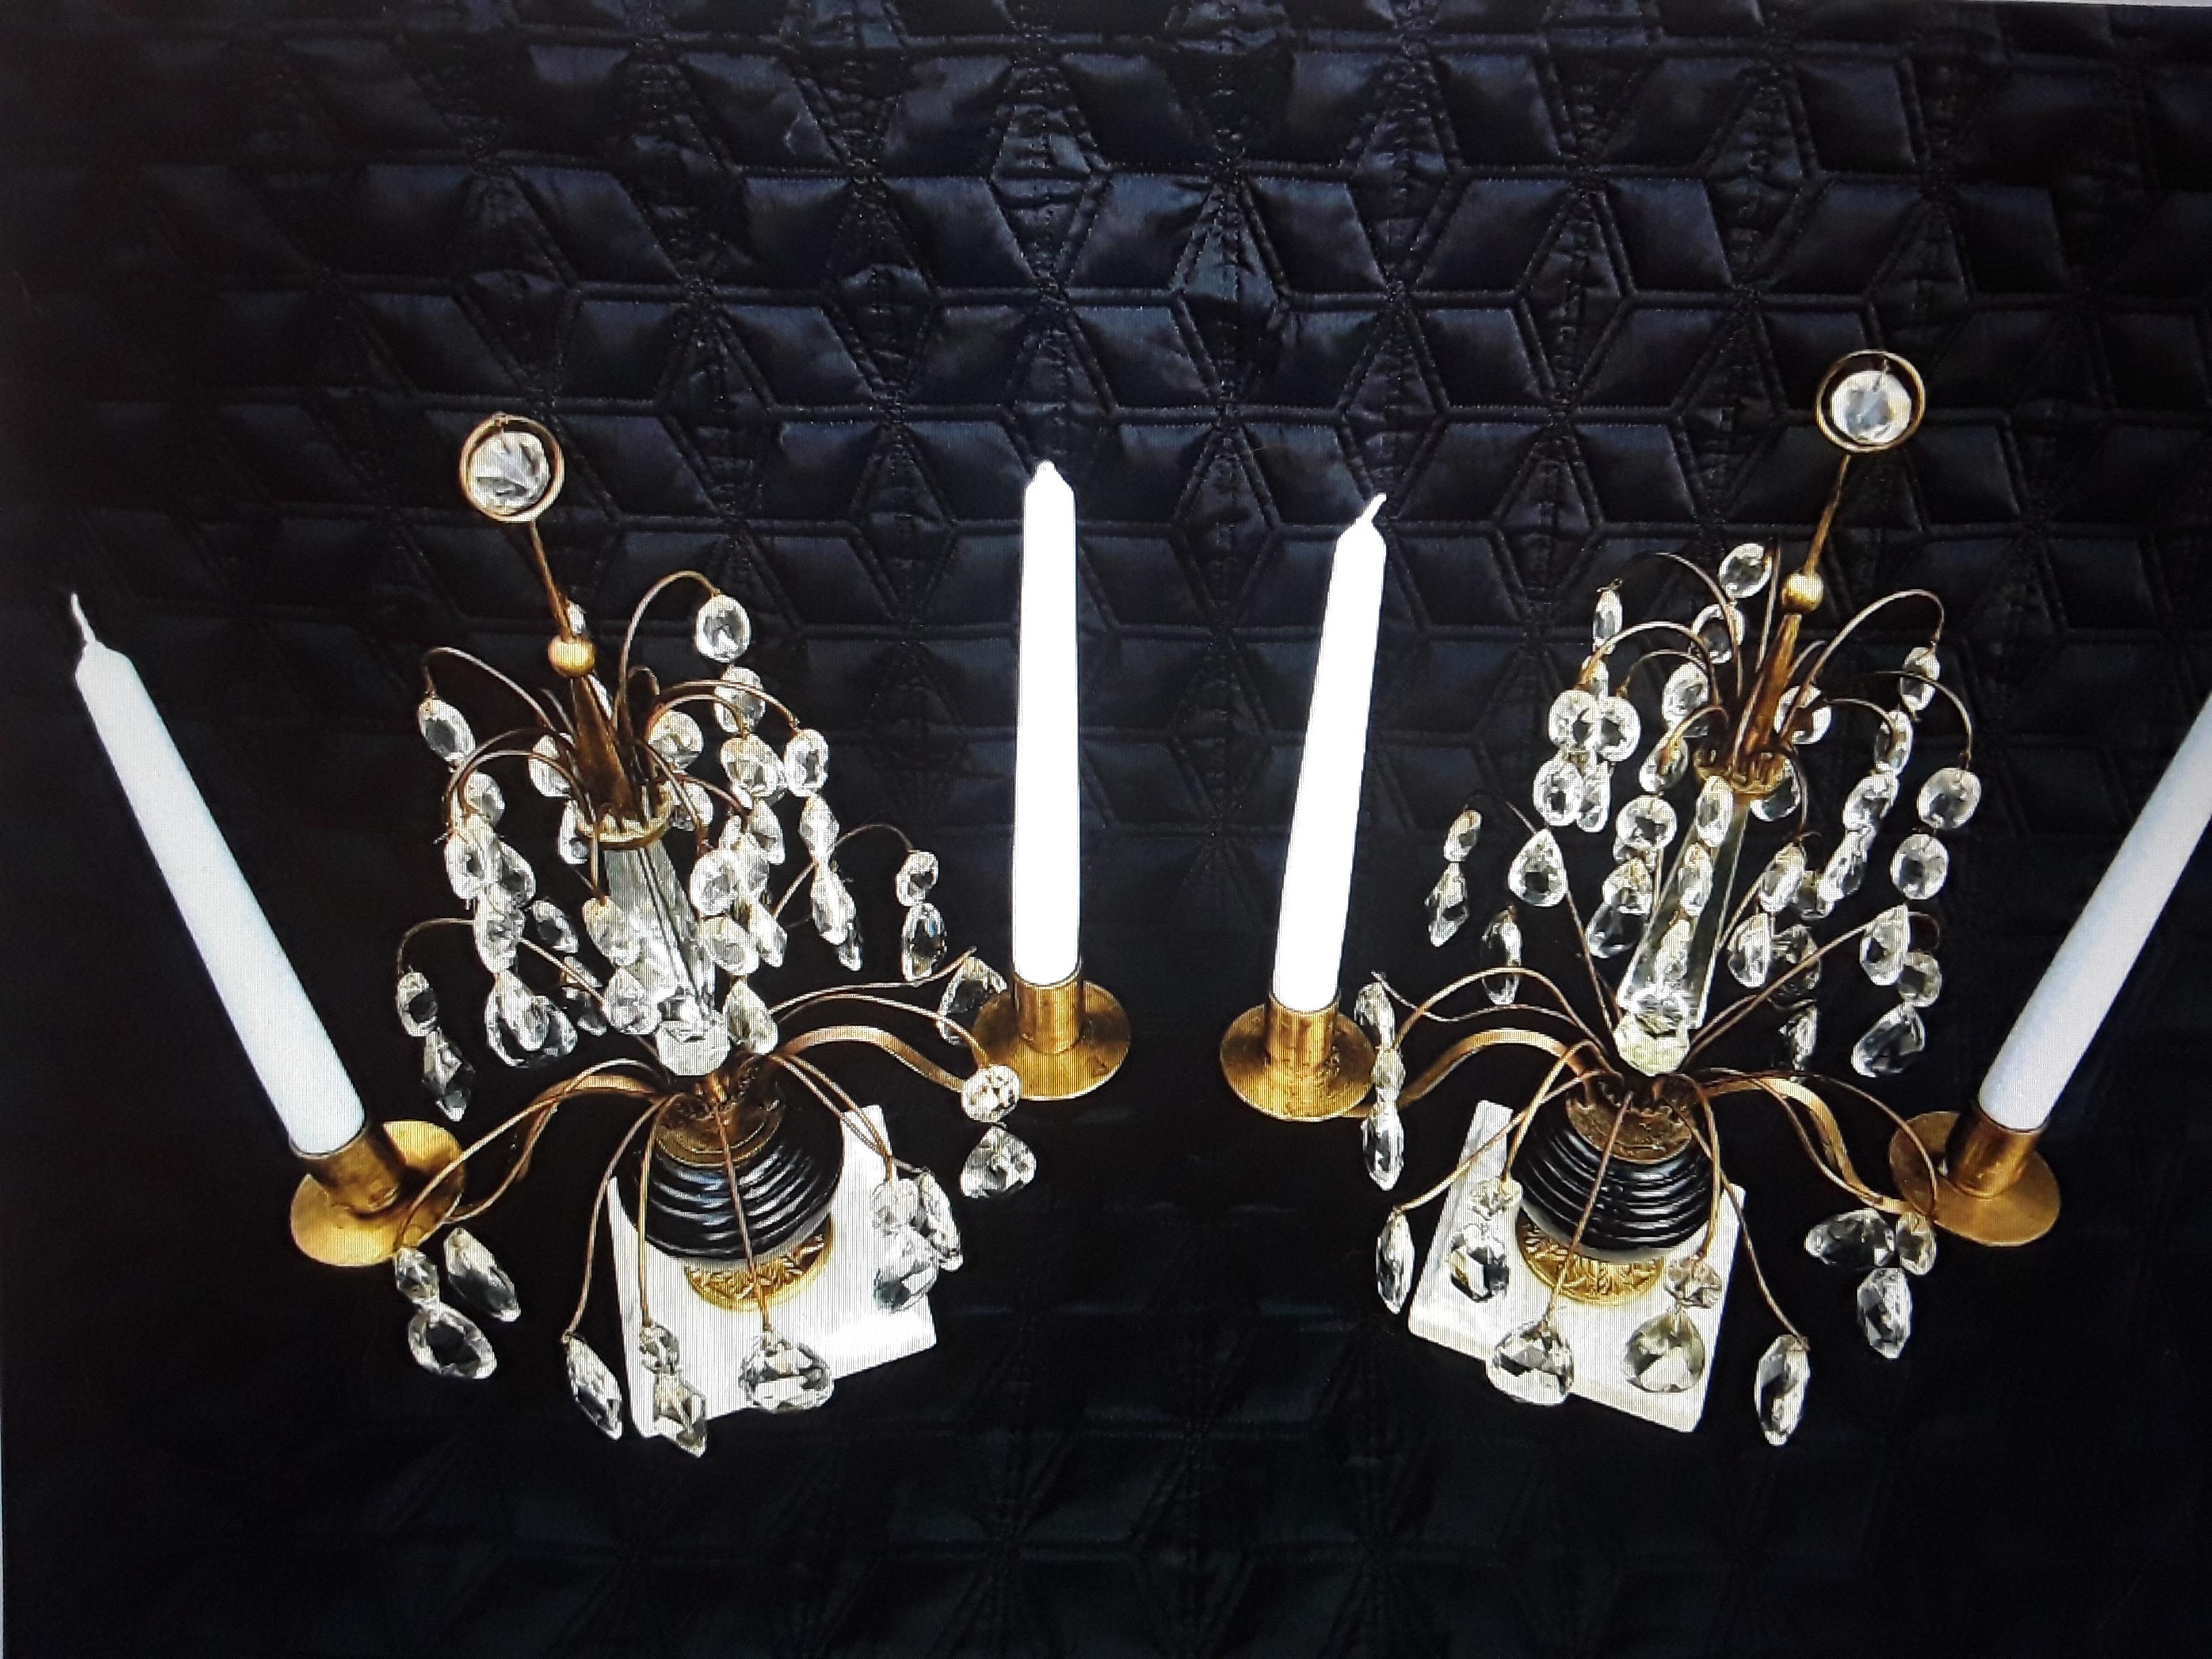 Pair Early 19thc Baltic Neoclassical style Ormolu w/ Cobalt Glass Candelabra For Sale 6